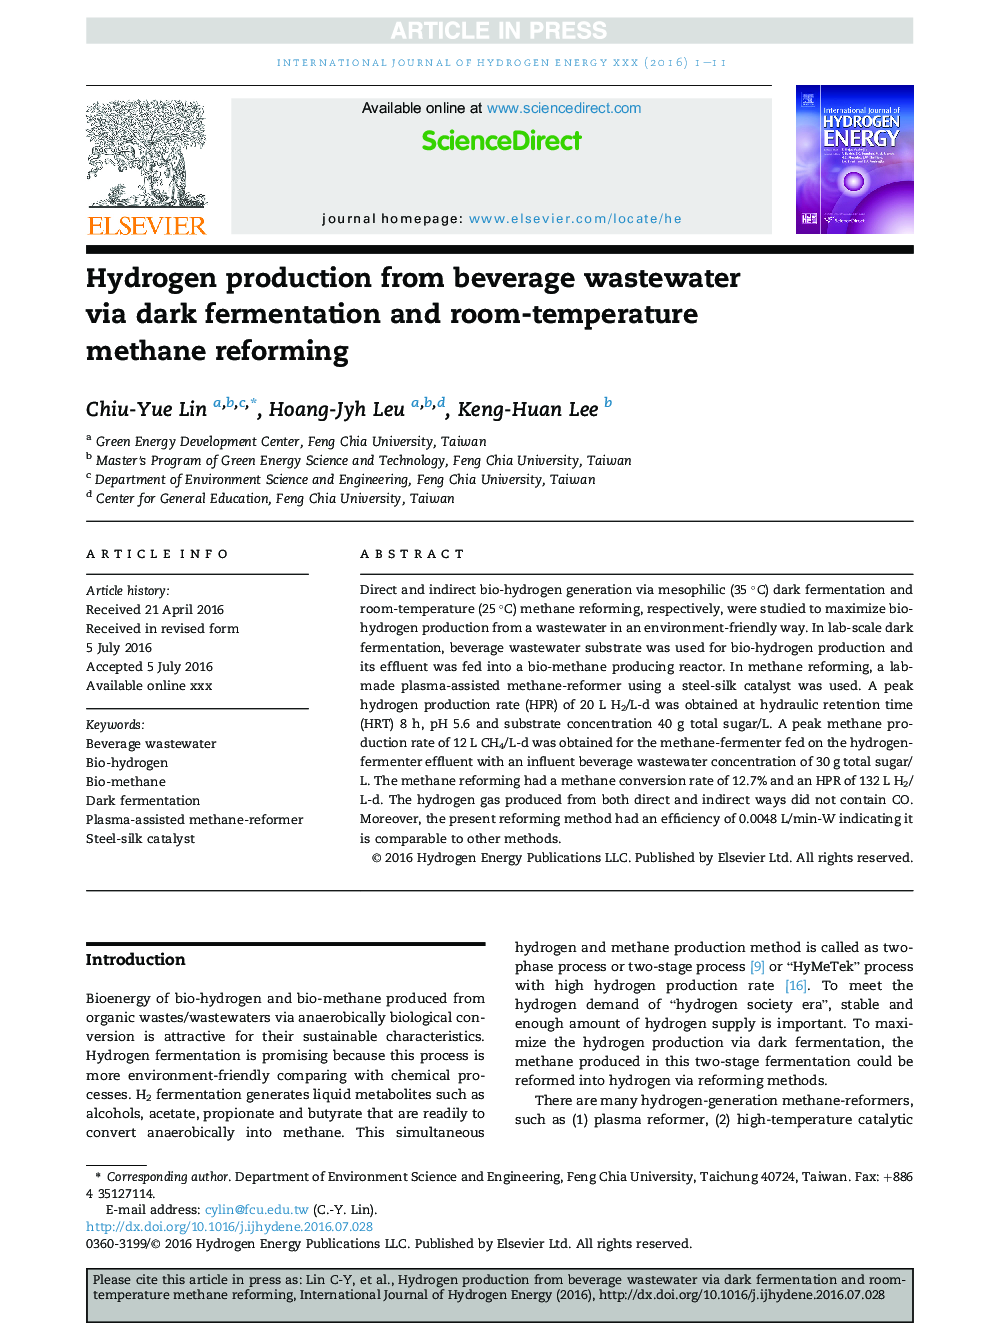 Hydrogen production from beverage wastewater via dark fermentation and room-temperature methane reforming